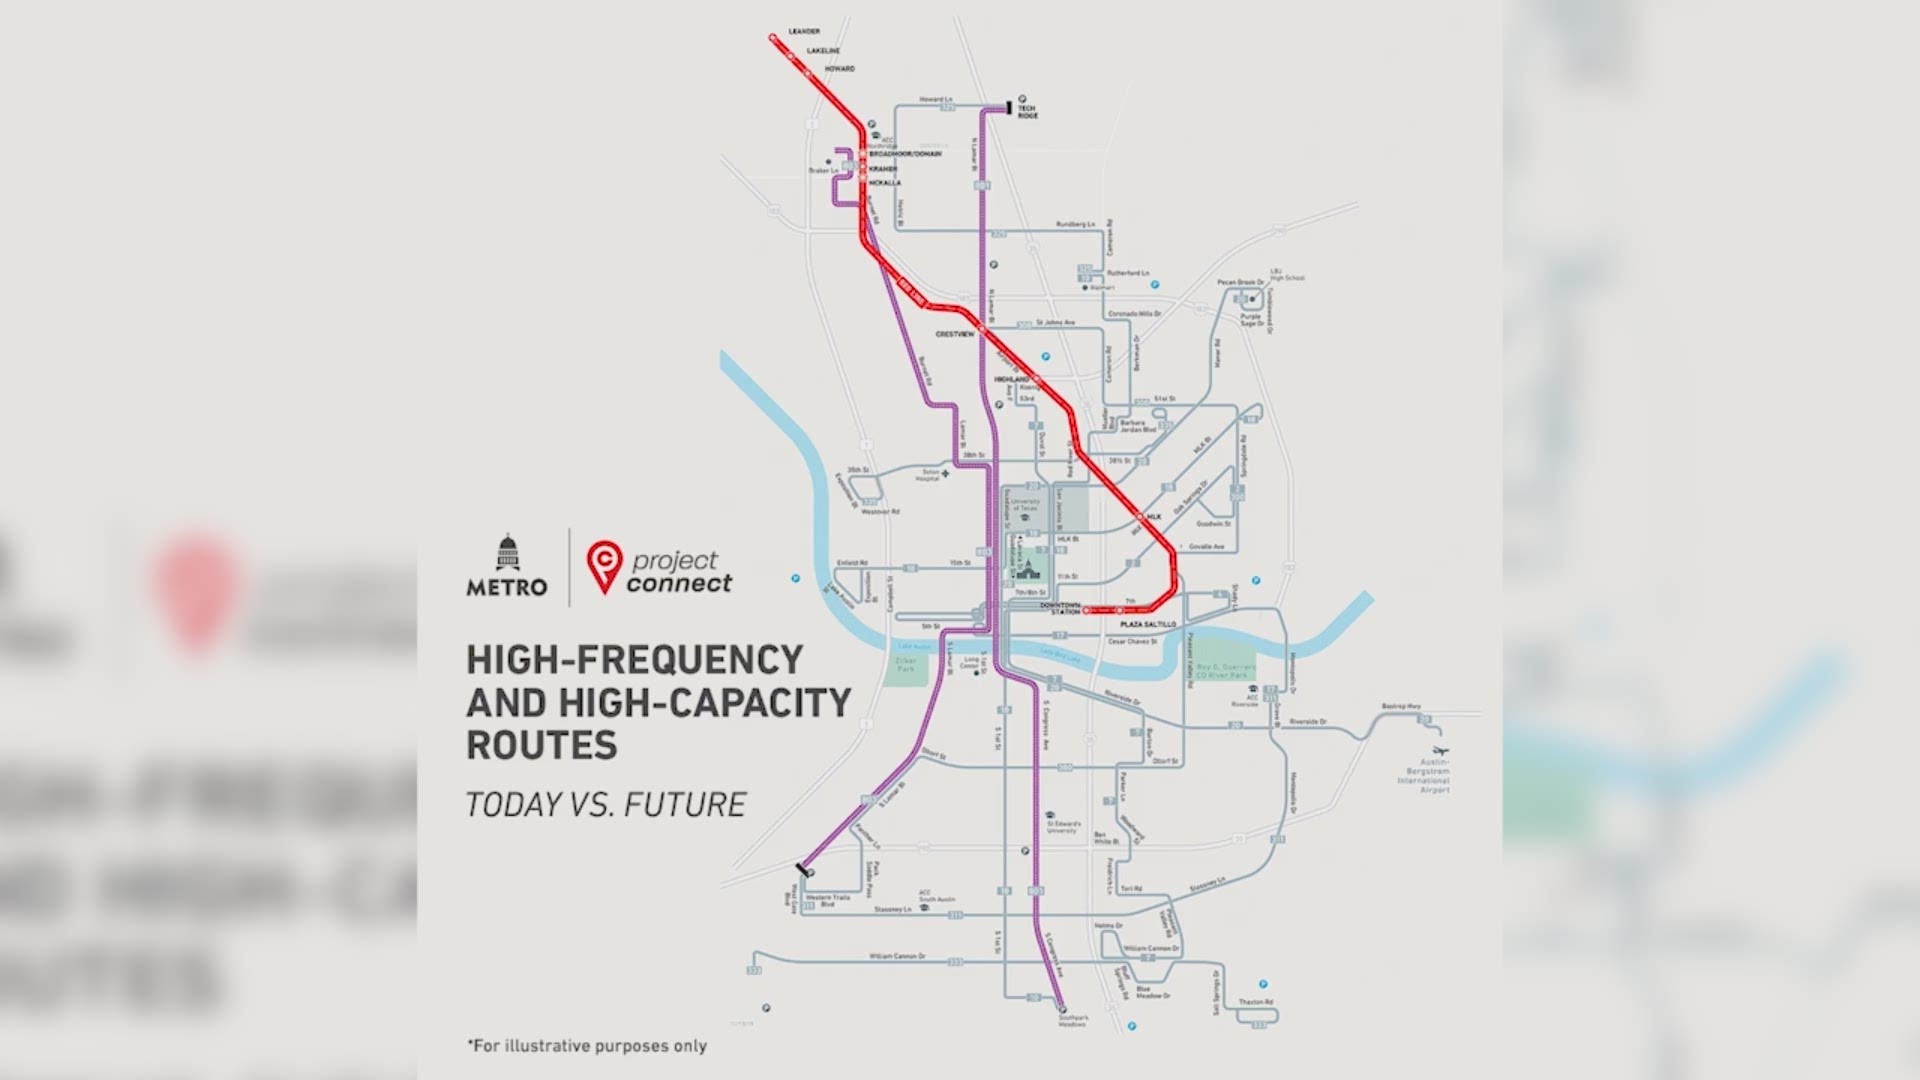 CapMetro and the City of Austin announced Project Connect on Tuesday – a transportation plan that includes a proposal for underground transit in the downtown area.